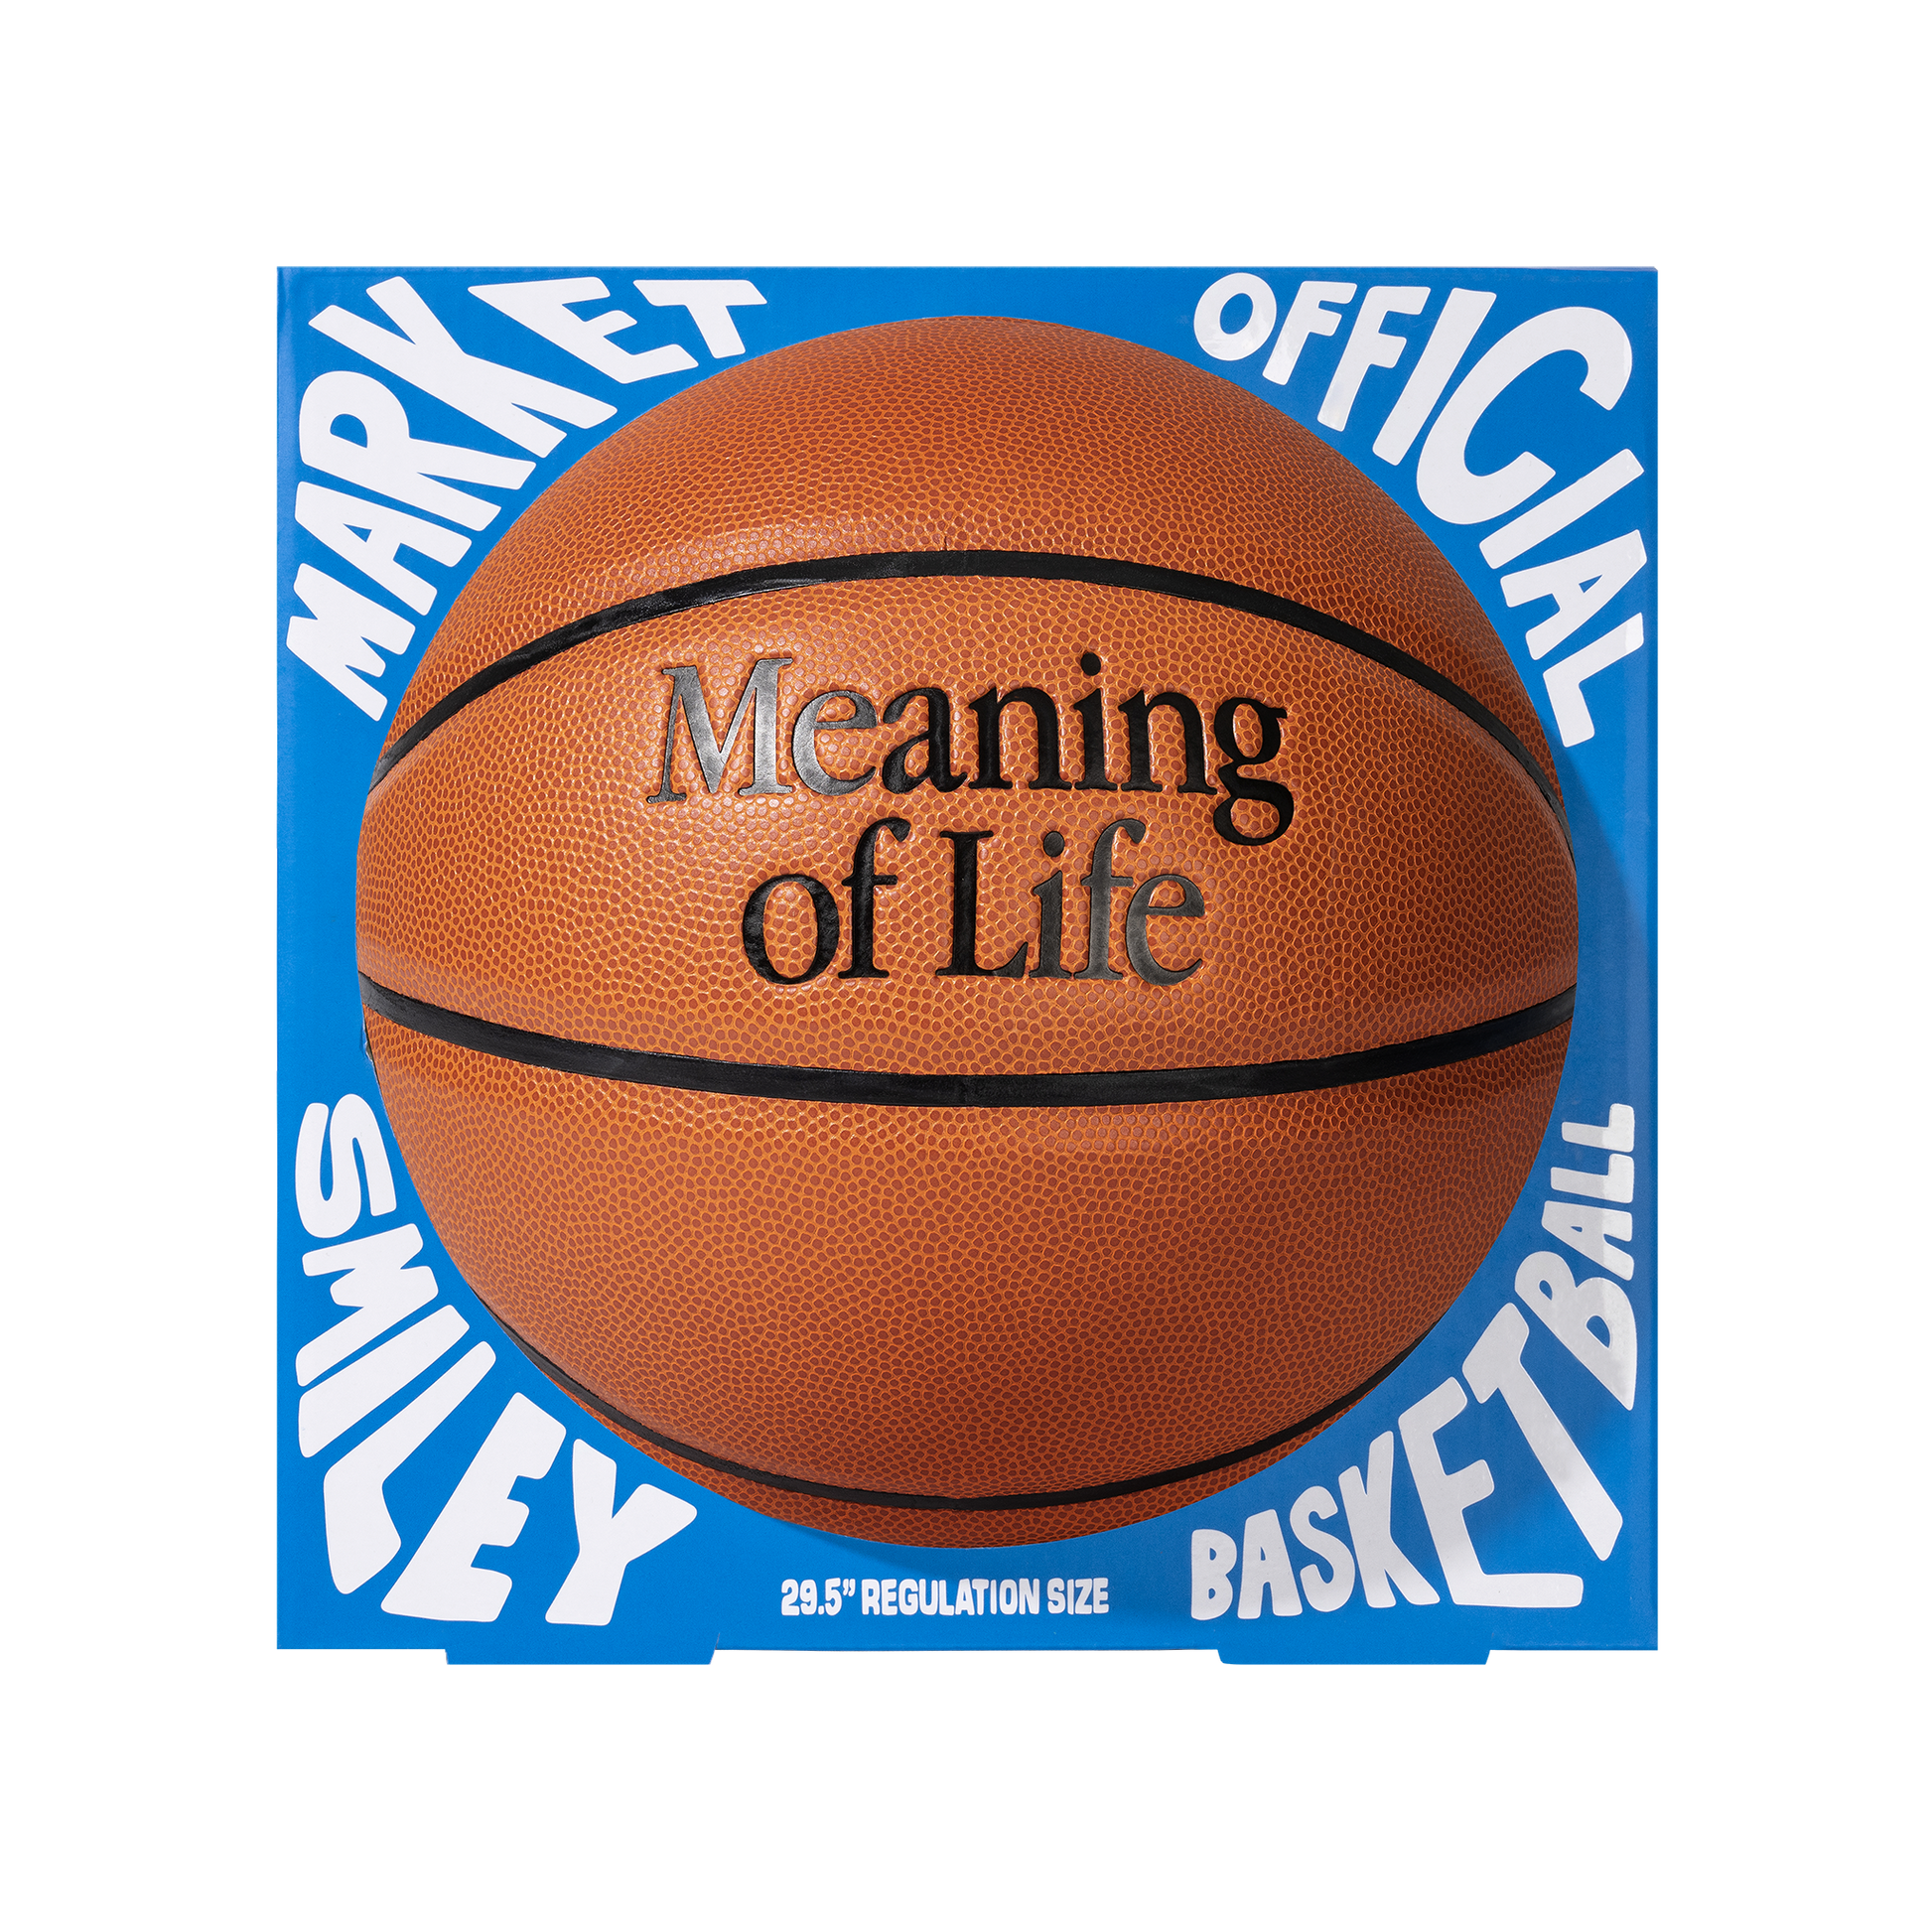 MARKET clothing brand MEANING OF LIFE BASKETBALL. Find more basketballs, sporting goods, homegoods and graphic tees at MarketStudios.com. Formally Chinatown Market. 